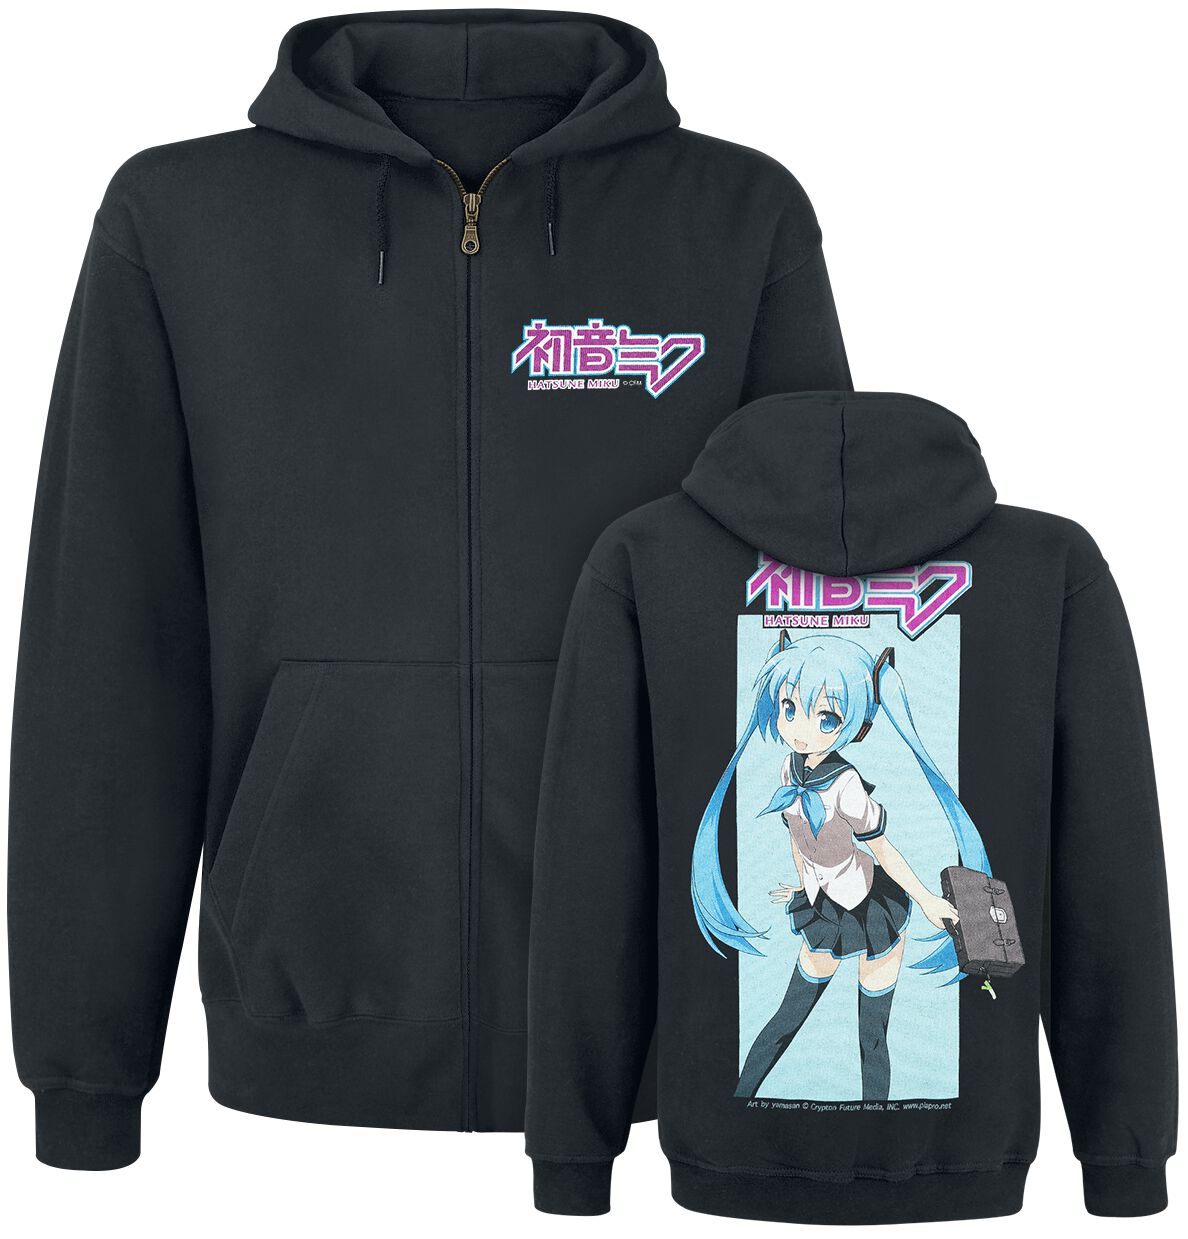 Vocaloid Hatsune Miku - Ready for Business Hooded zip black